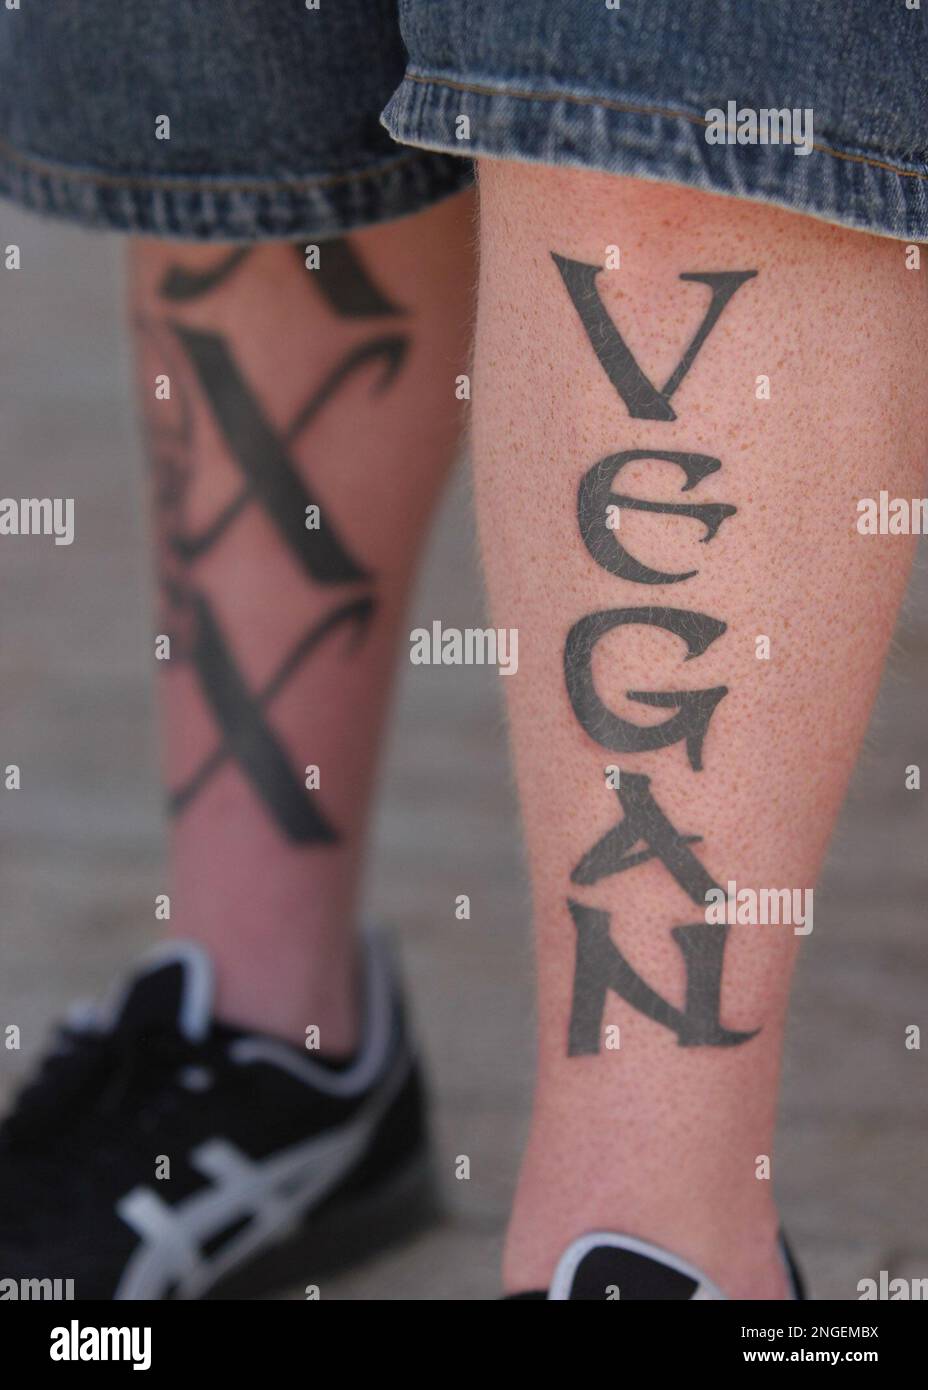 VEGAN TATTOOS  Alf has joined Animal Liberation Front  Tattoo by  acewilde  Vegan Tattoos Dont Hurt Animals  vegantattoo  vegantattoostudios alf govegan veganink veganlife animalliberation  alf  Facebook